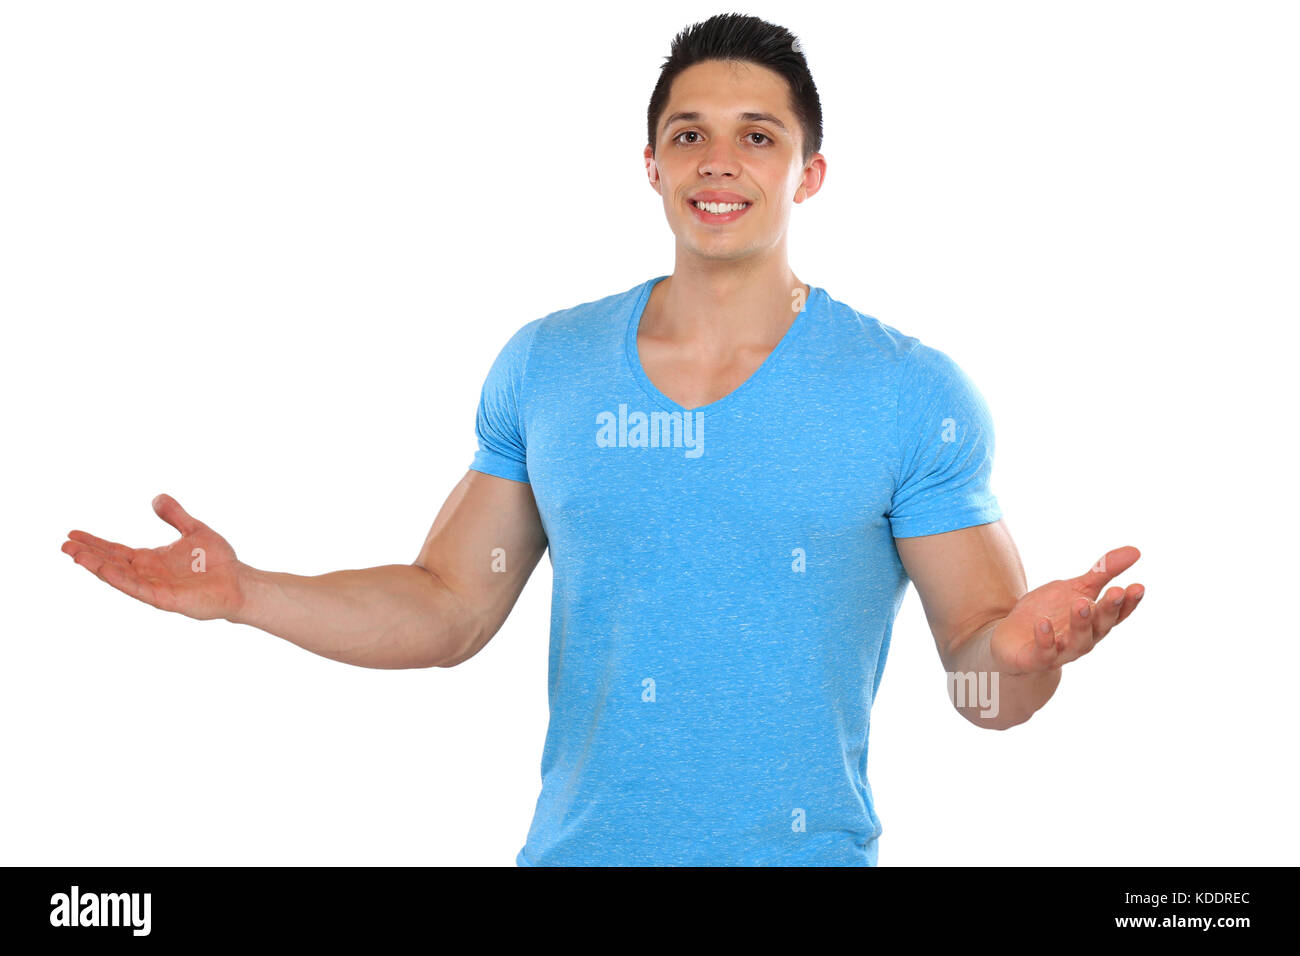 Welcome inviting invitation young man isolated on a white background Stock Photo